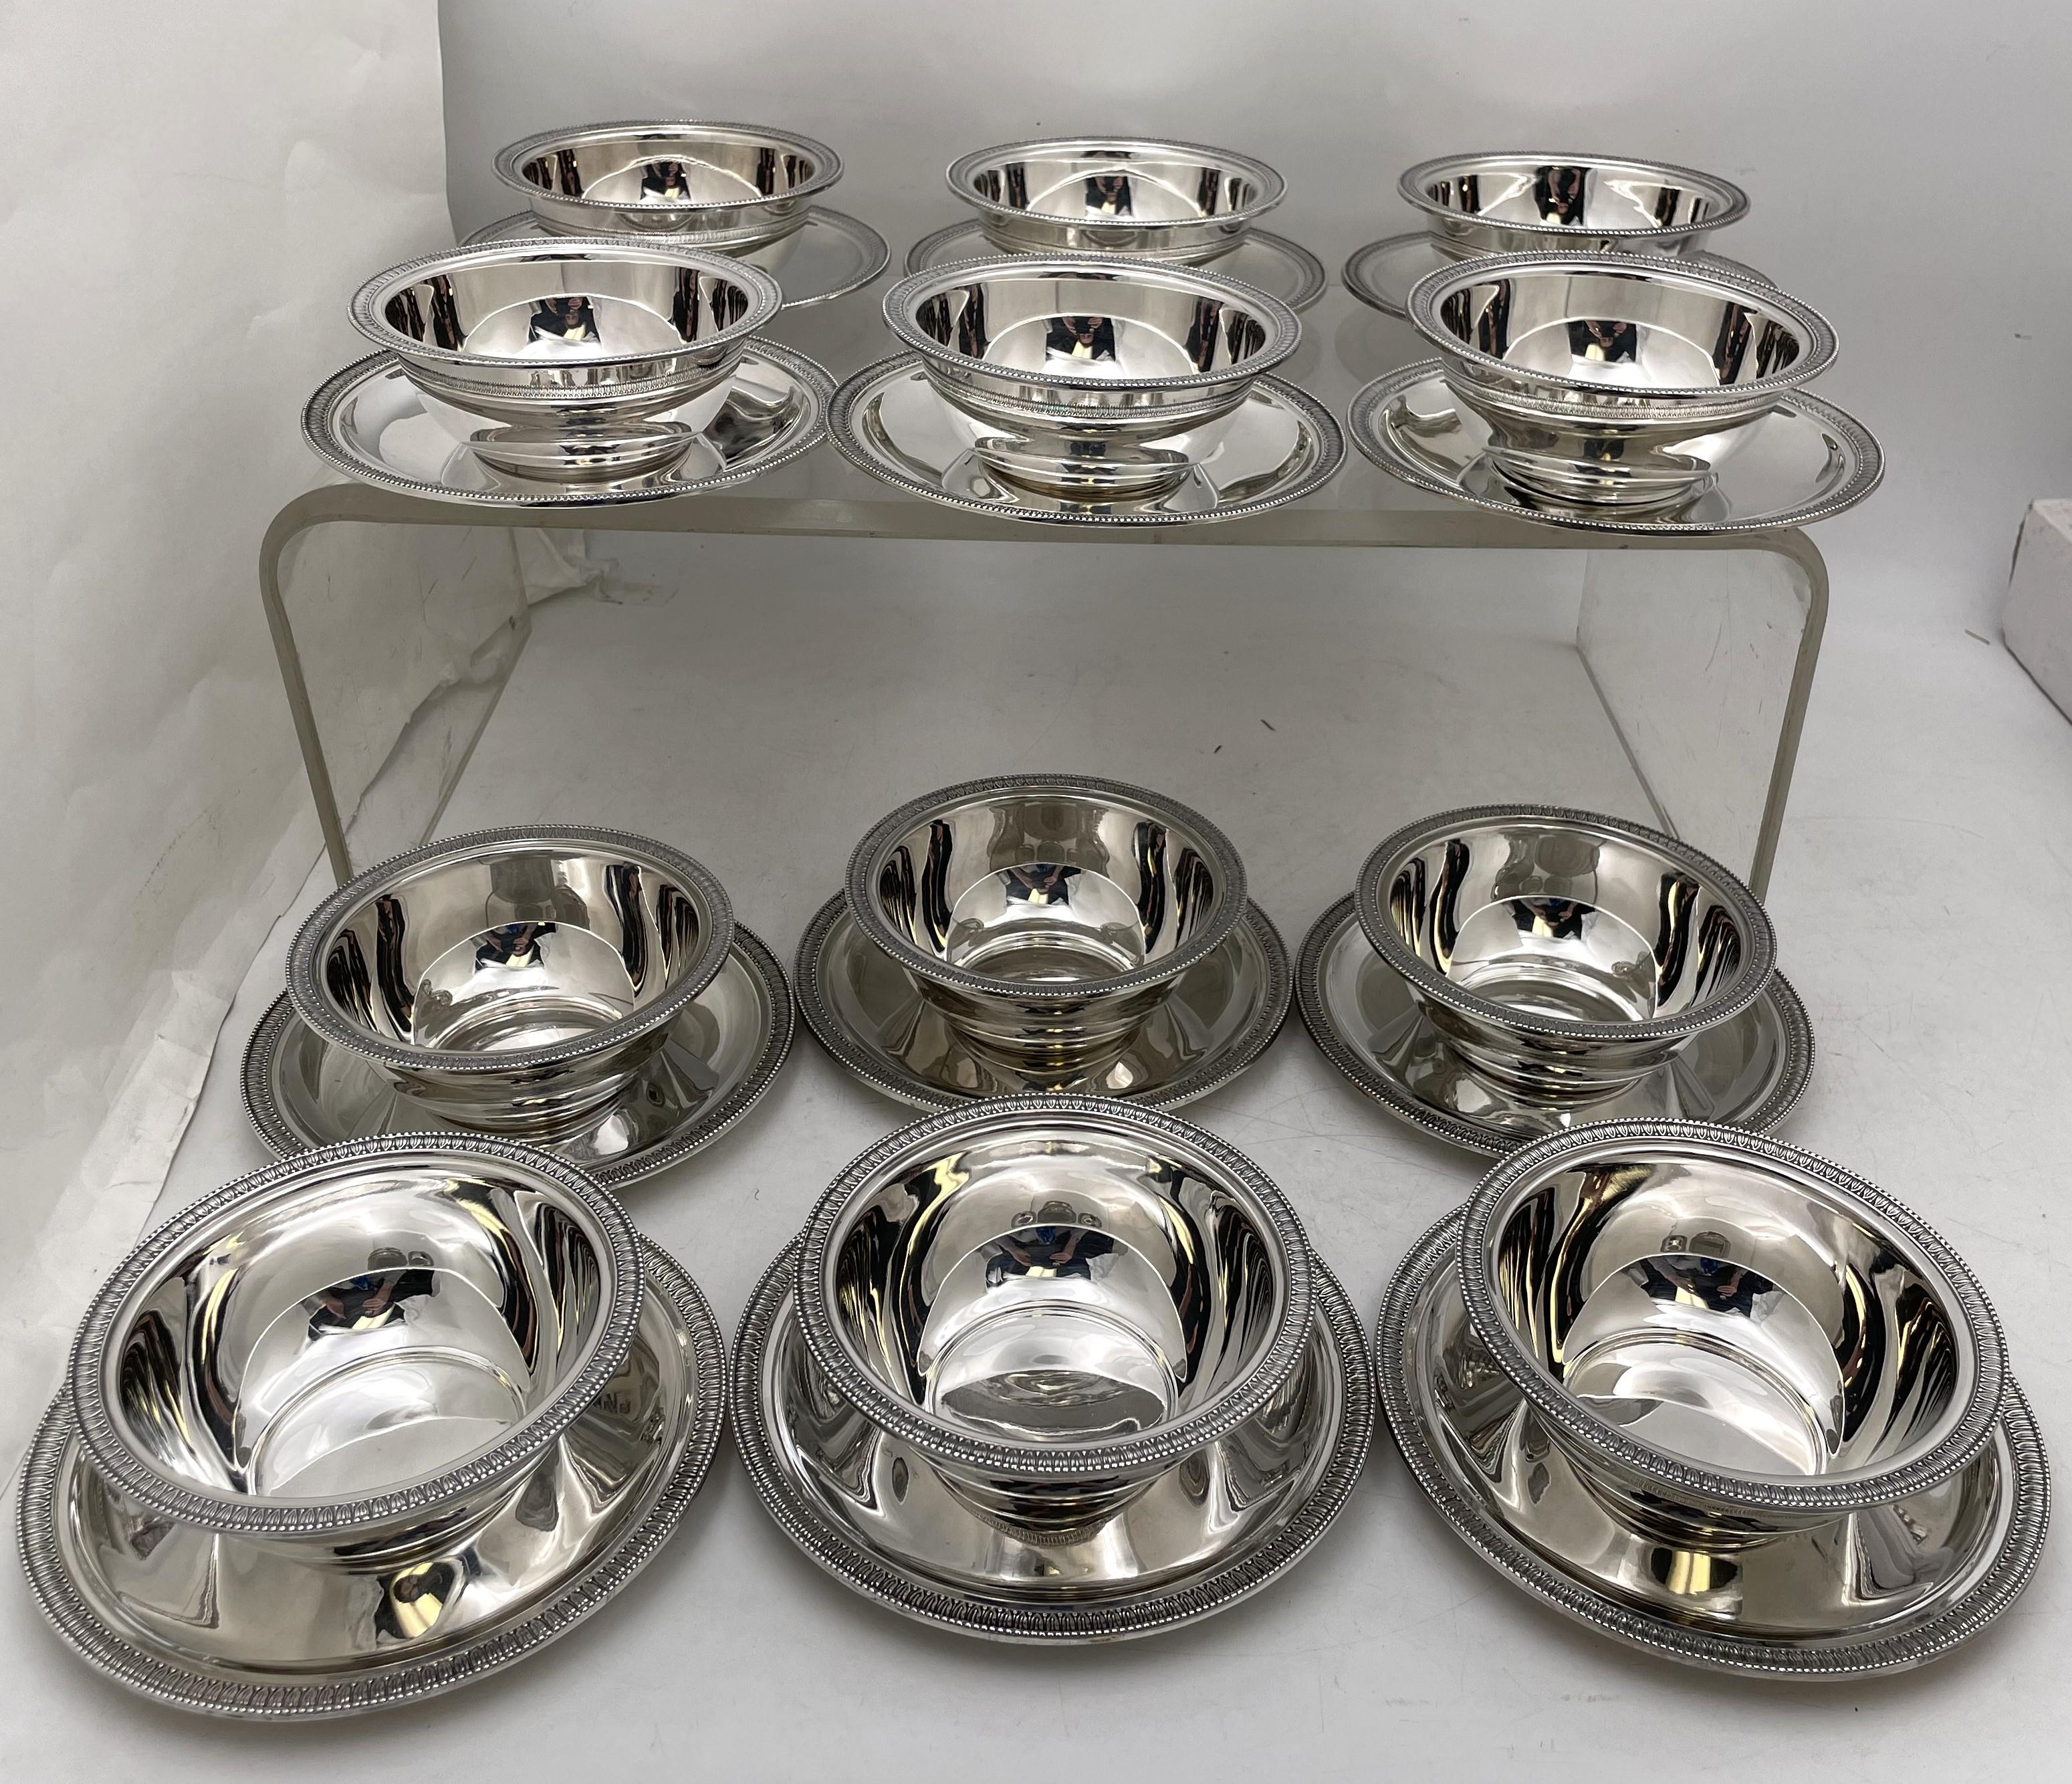 Italian continental silver set of 12 dessert / compote bowls with 12 matching underplates, with a beautiful, curvilinear design, and rims adorned with stylized geometric motifs, made by Ricci, active since 1840, between 1944 and 1968 in Alessandria,